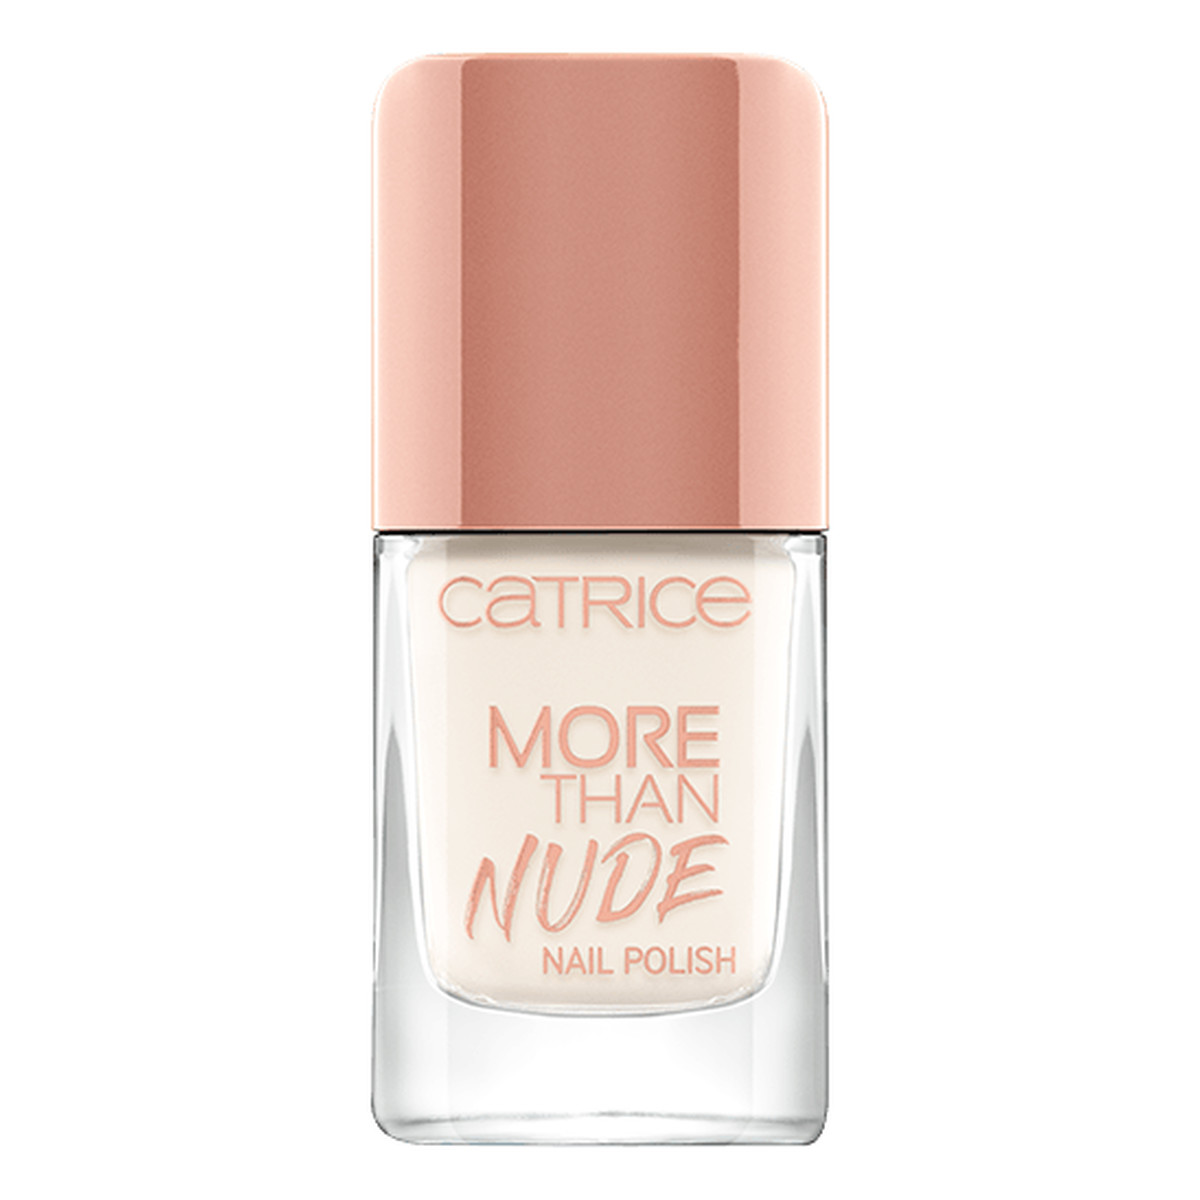 Catrice More Than Nude Lakier Do Paznokci 10ml